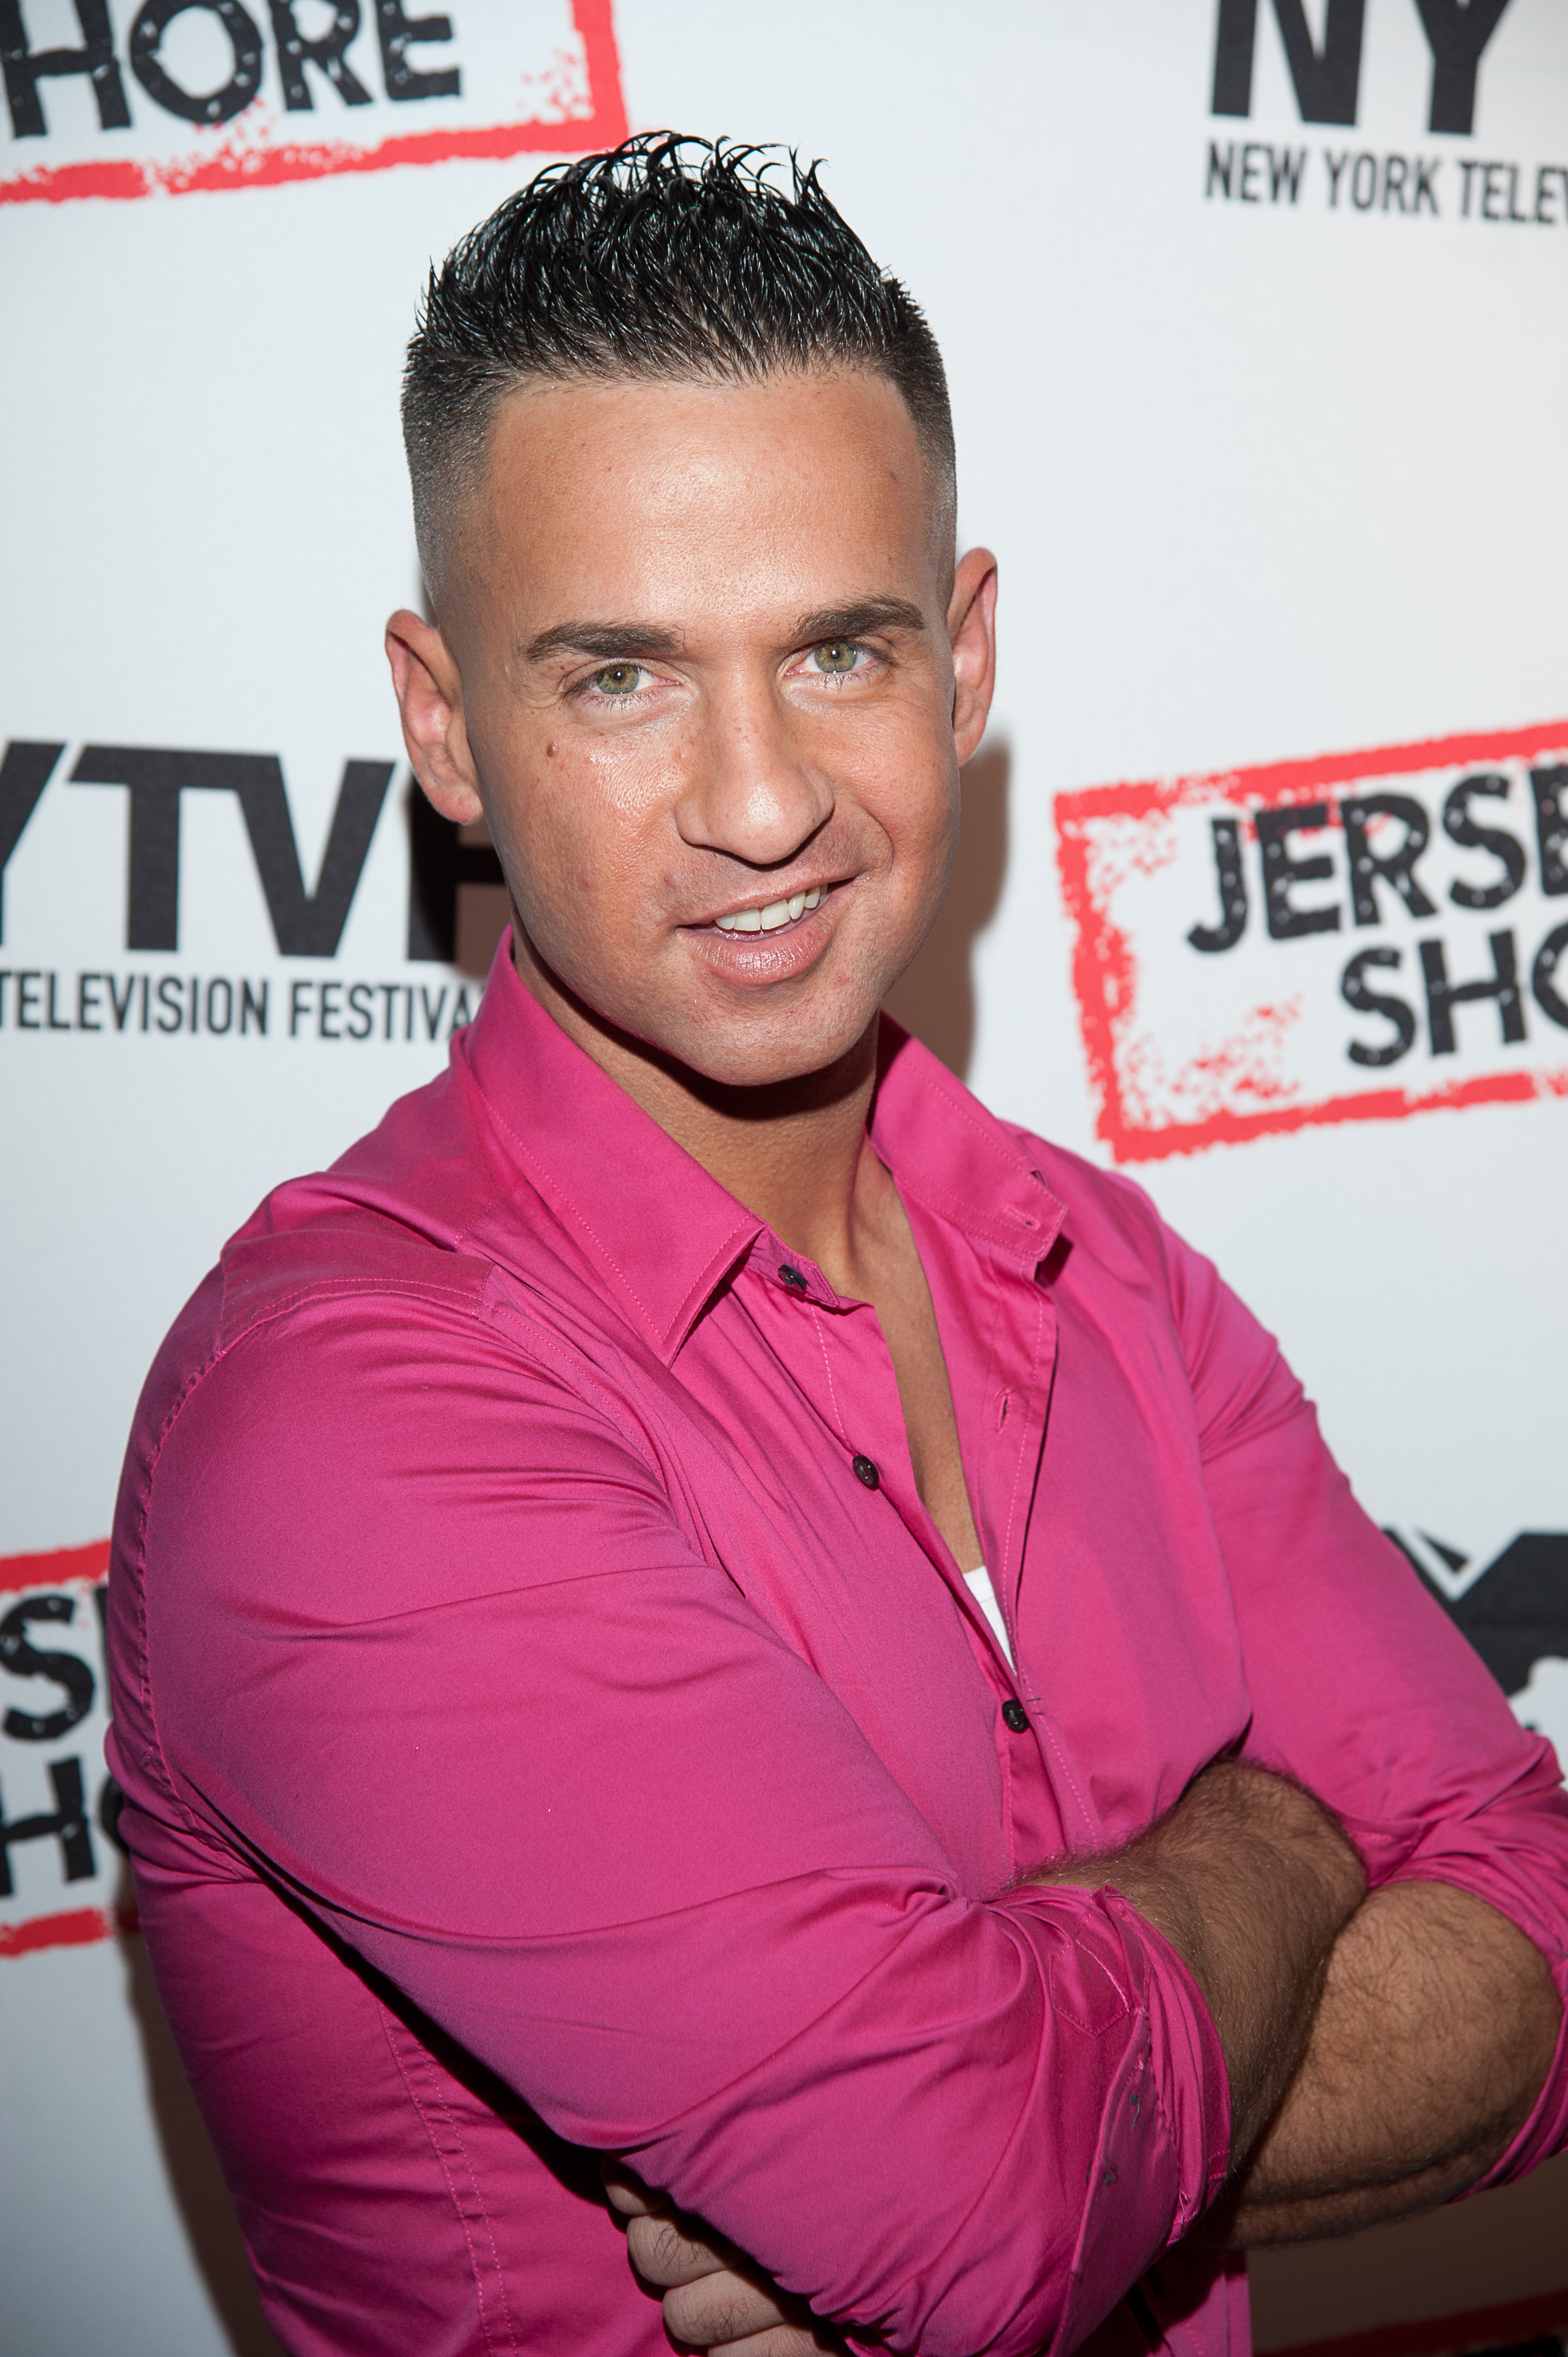 Mike "The Situation" Sorrentino attends "Love, Loss, (Gym, Tan) and Laundry: A Farewell To The Jersey Shore" during the 2012 New York Television Festival. (Dave Kotinsky&mdash;Getty Images)